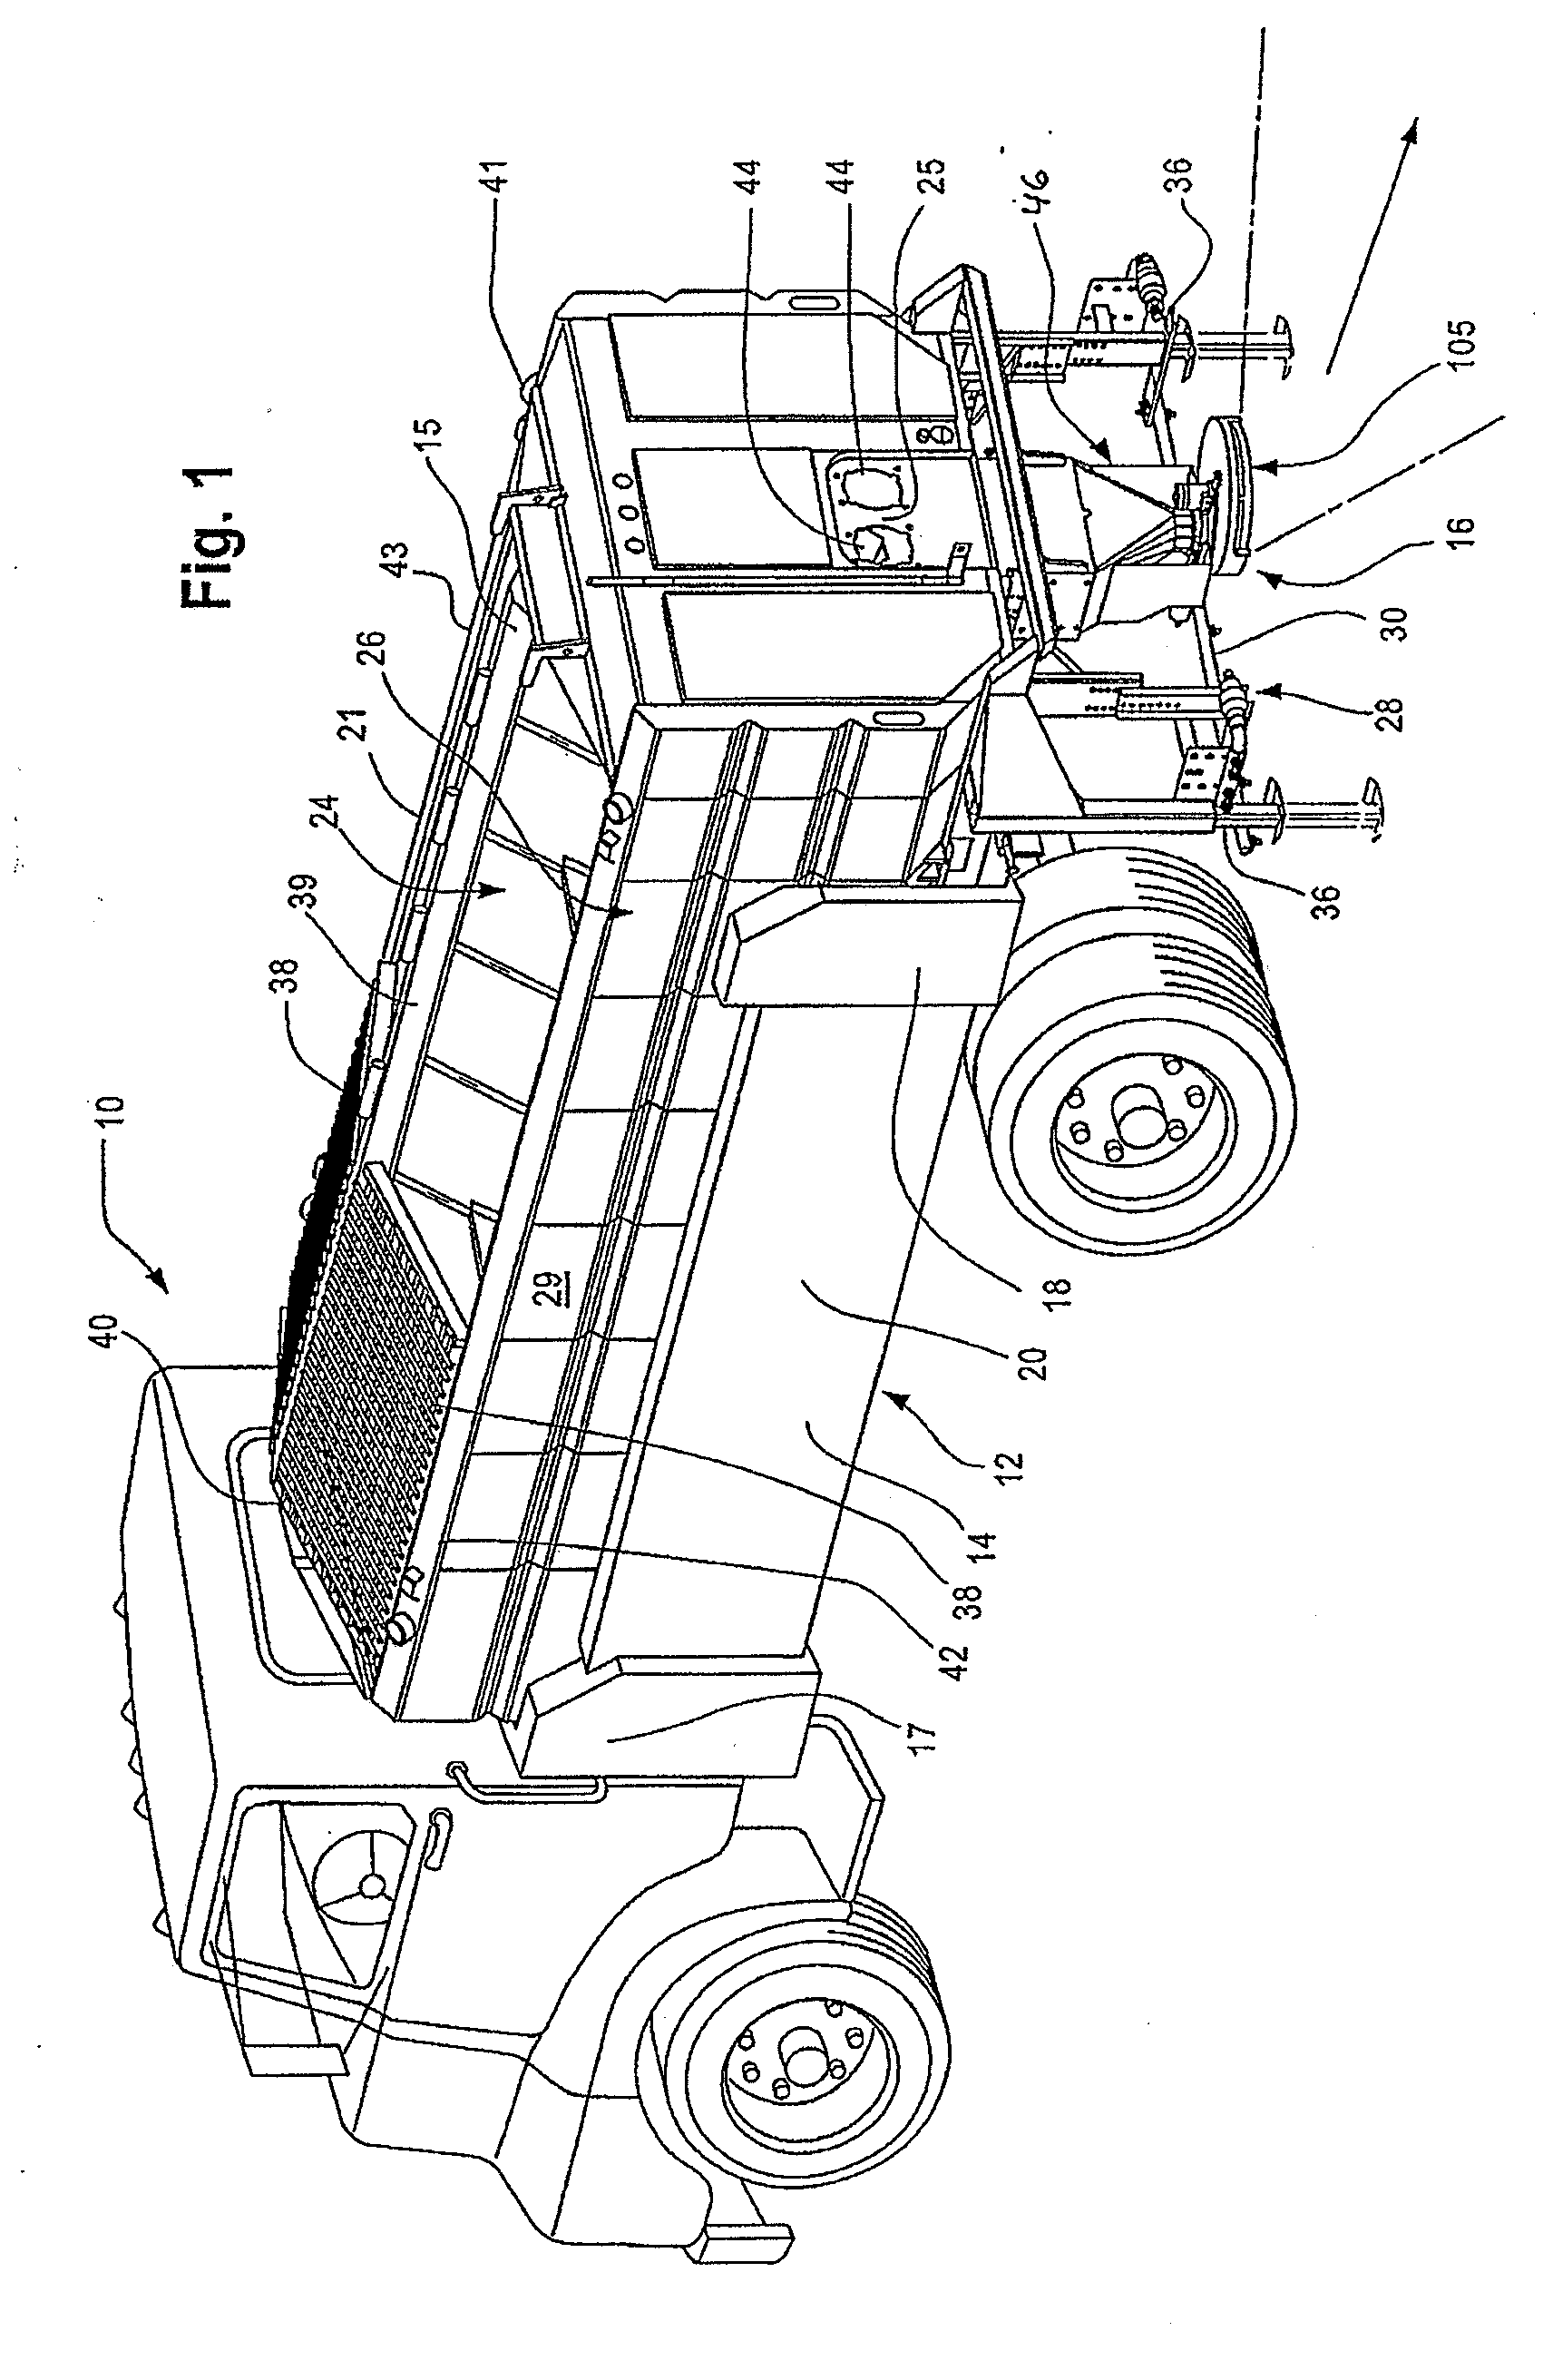 Apparatus for spreading granular materials from vehicle